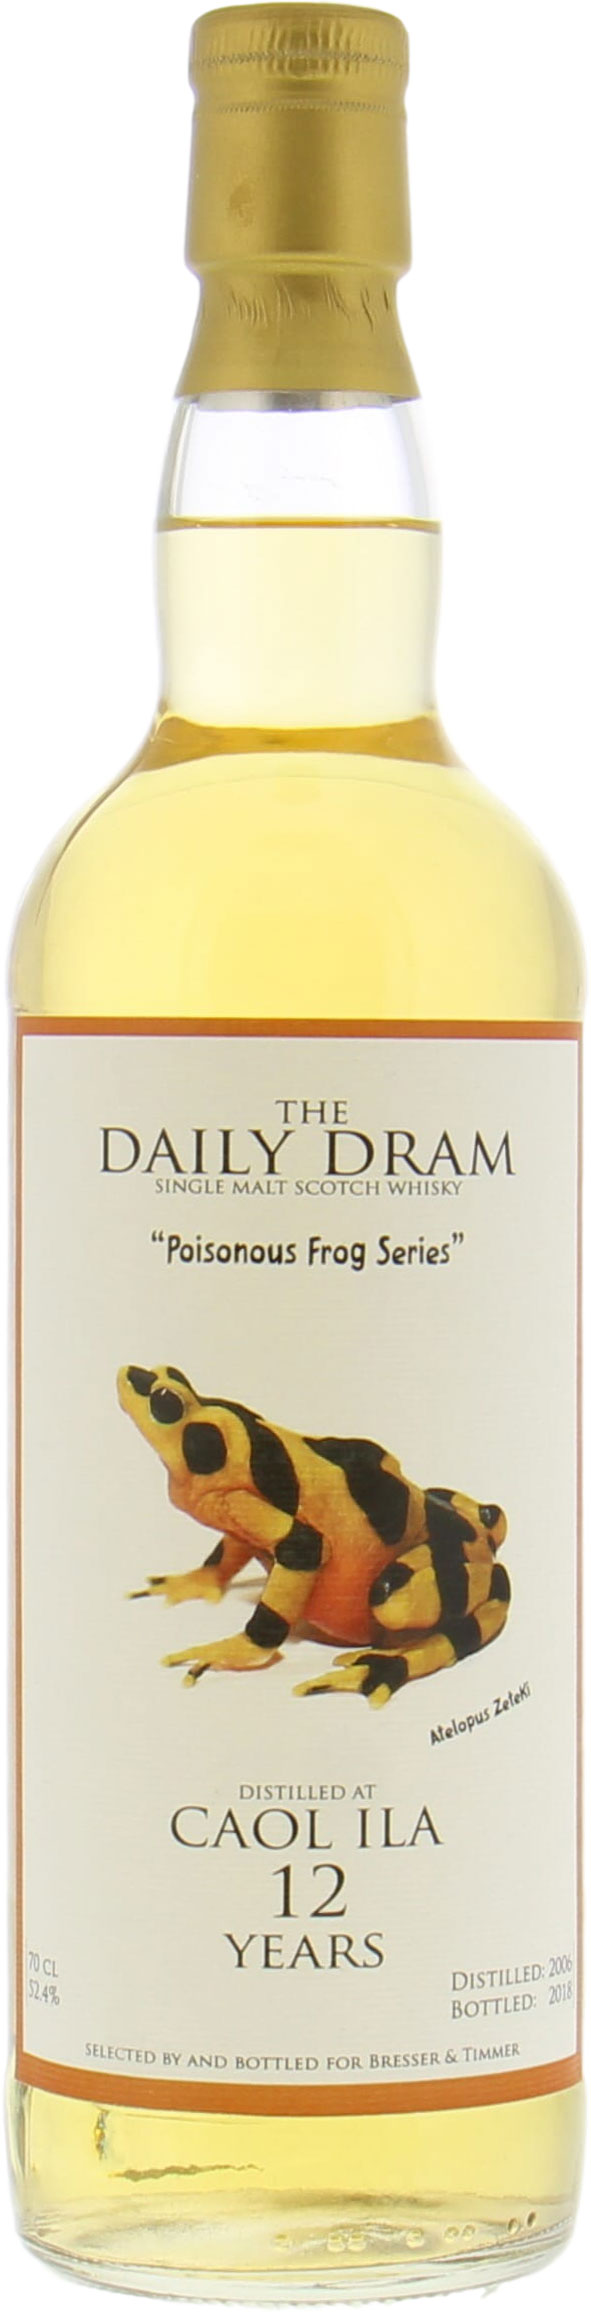 Caol Ila - Daily Dram 12 Years Old Poisonous Frog 52.4% 2006